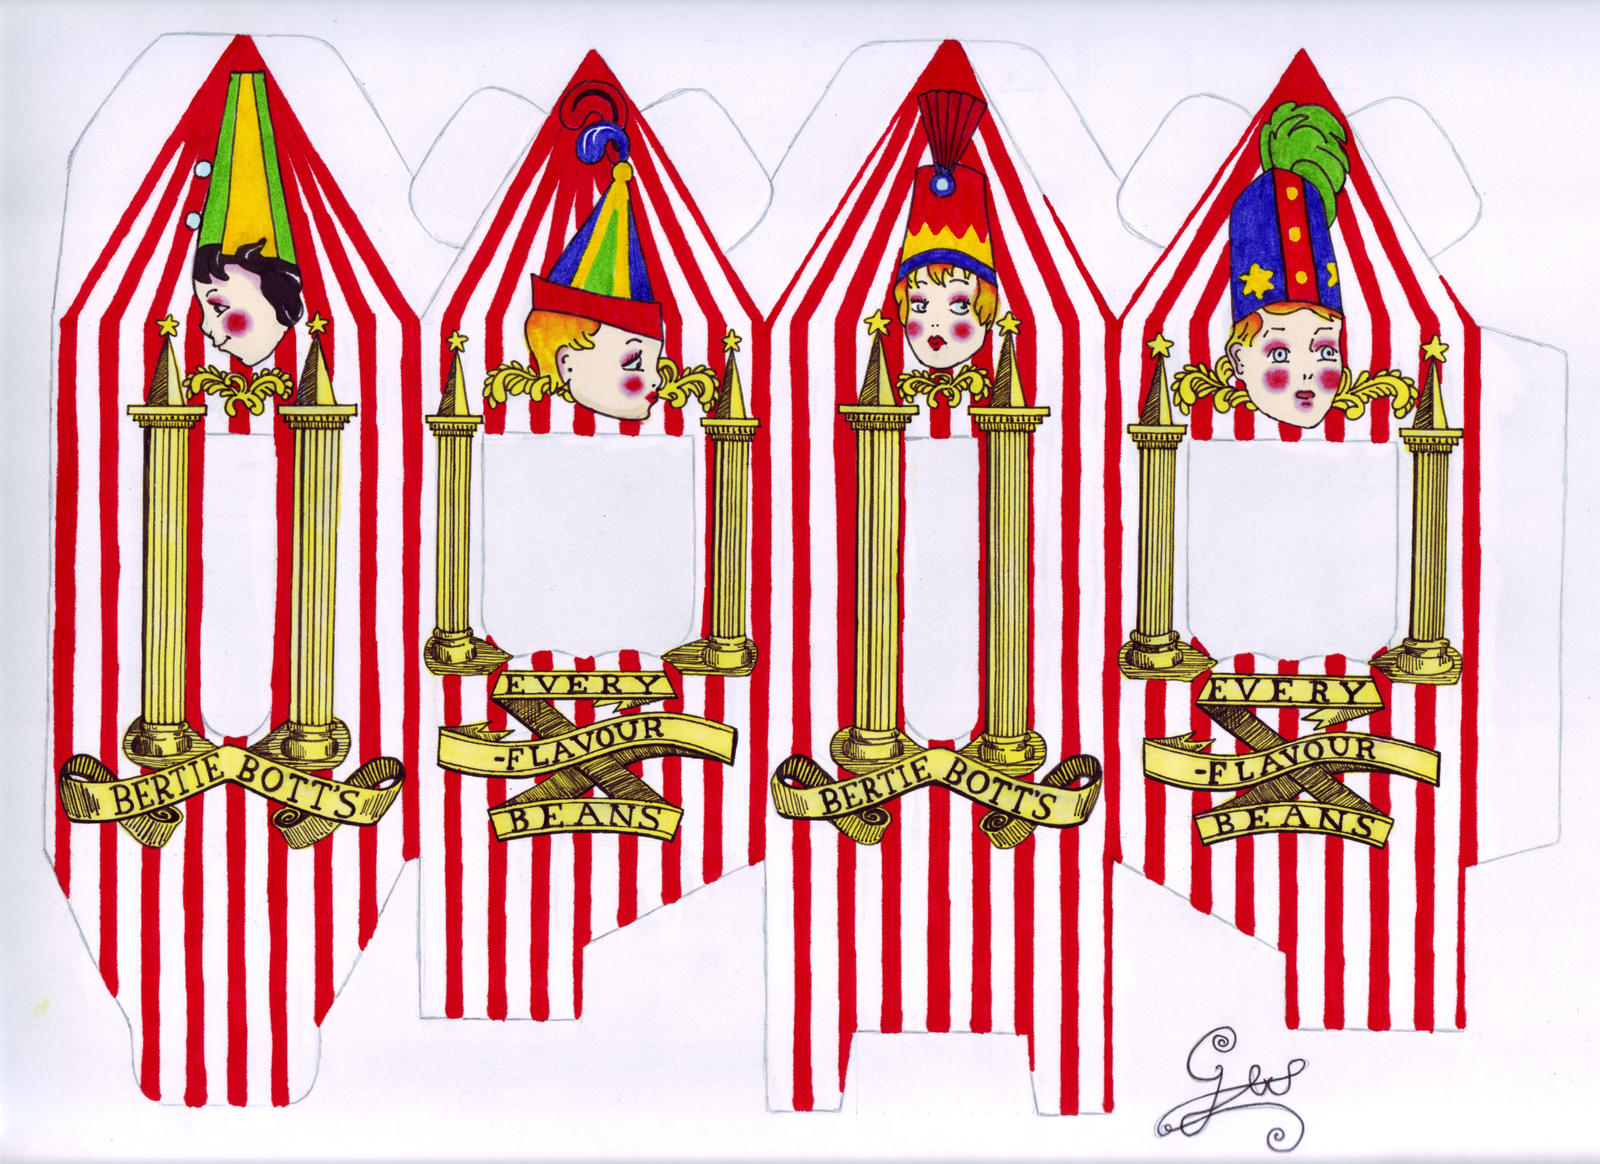 bertie_bott__s_beans_coloured_by_gwendolynwolters d4e6v7h